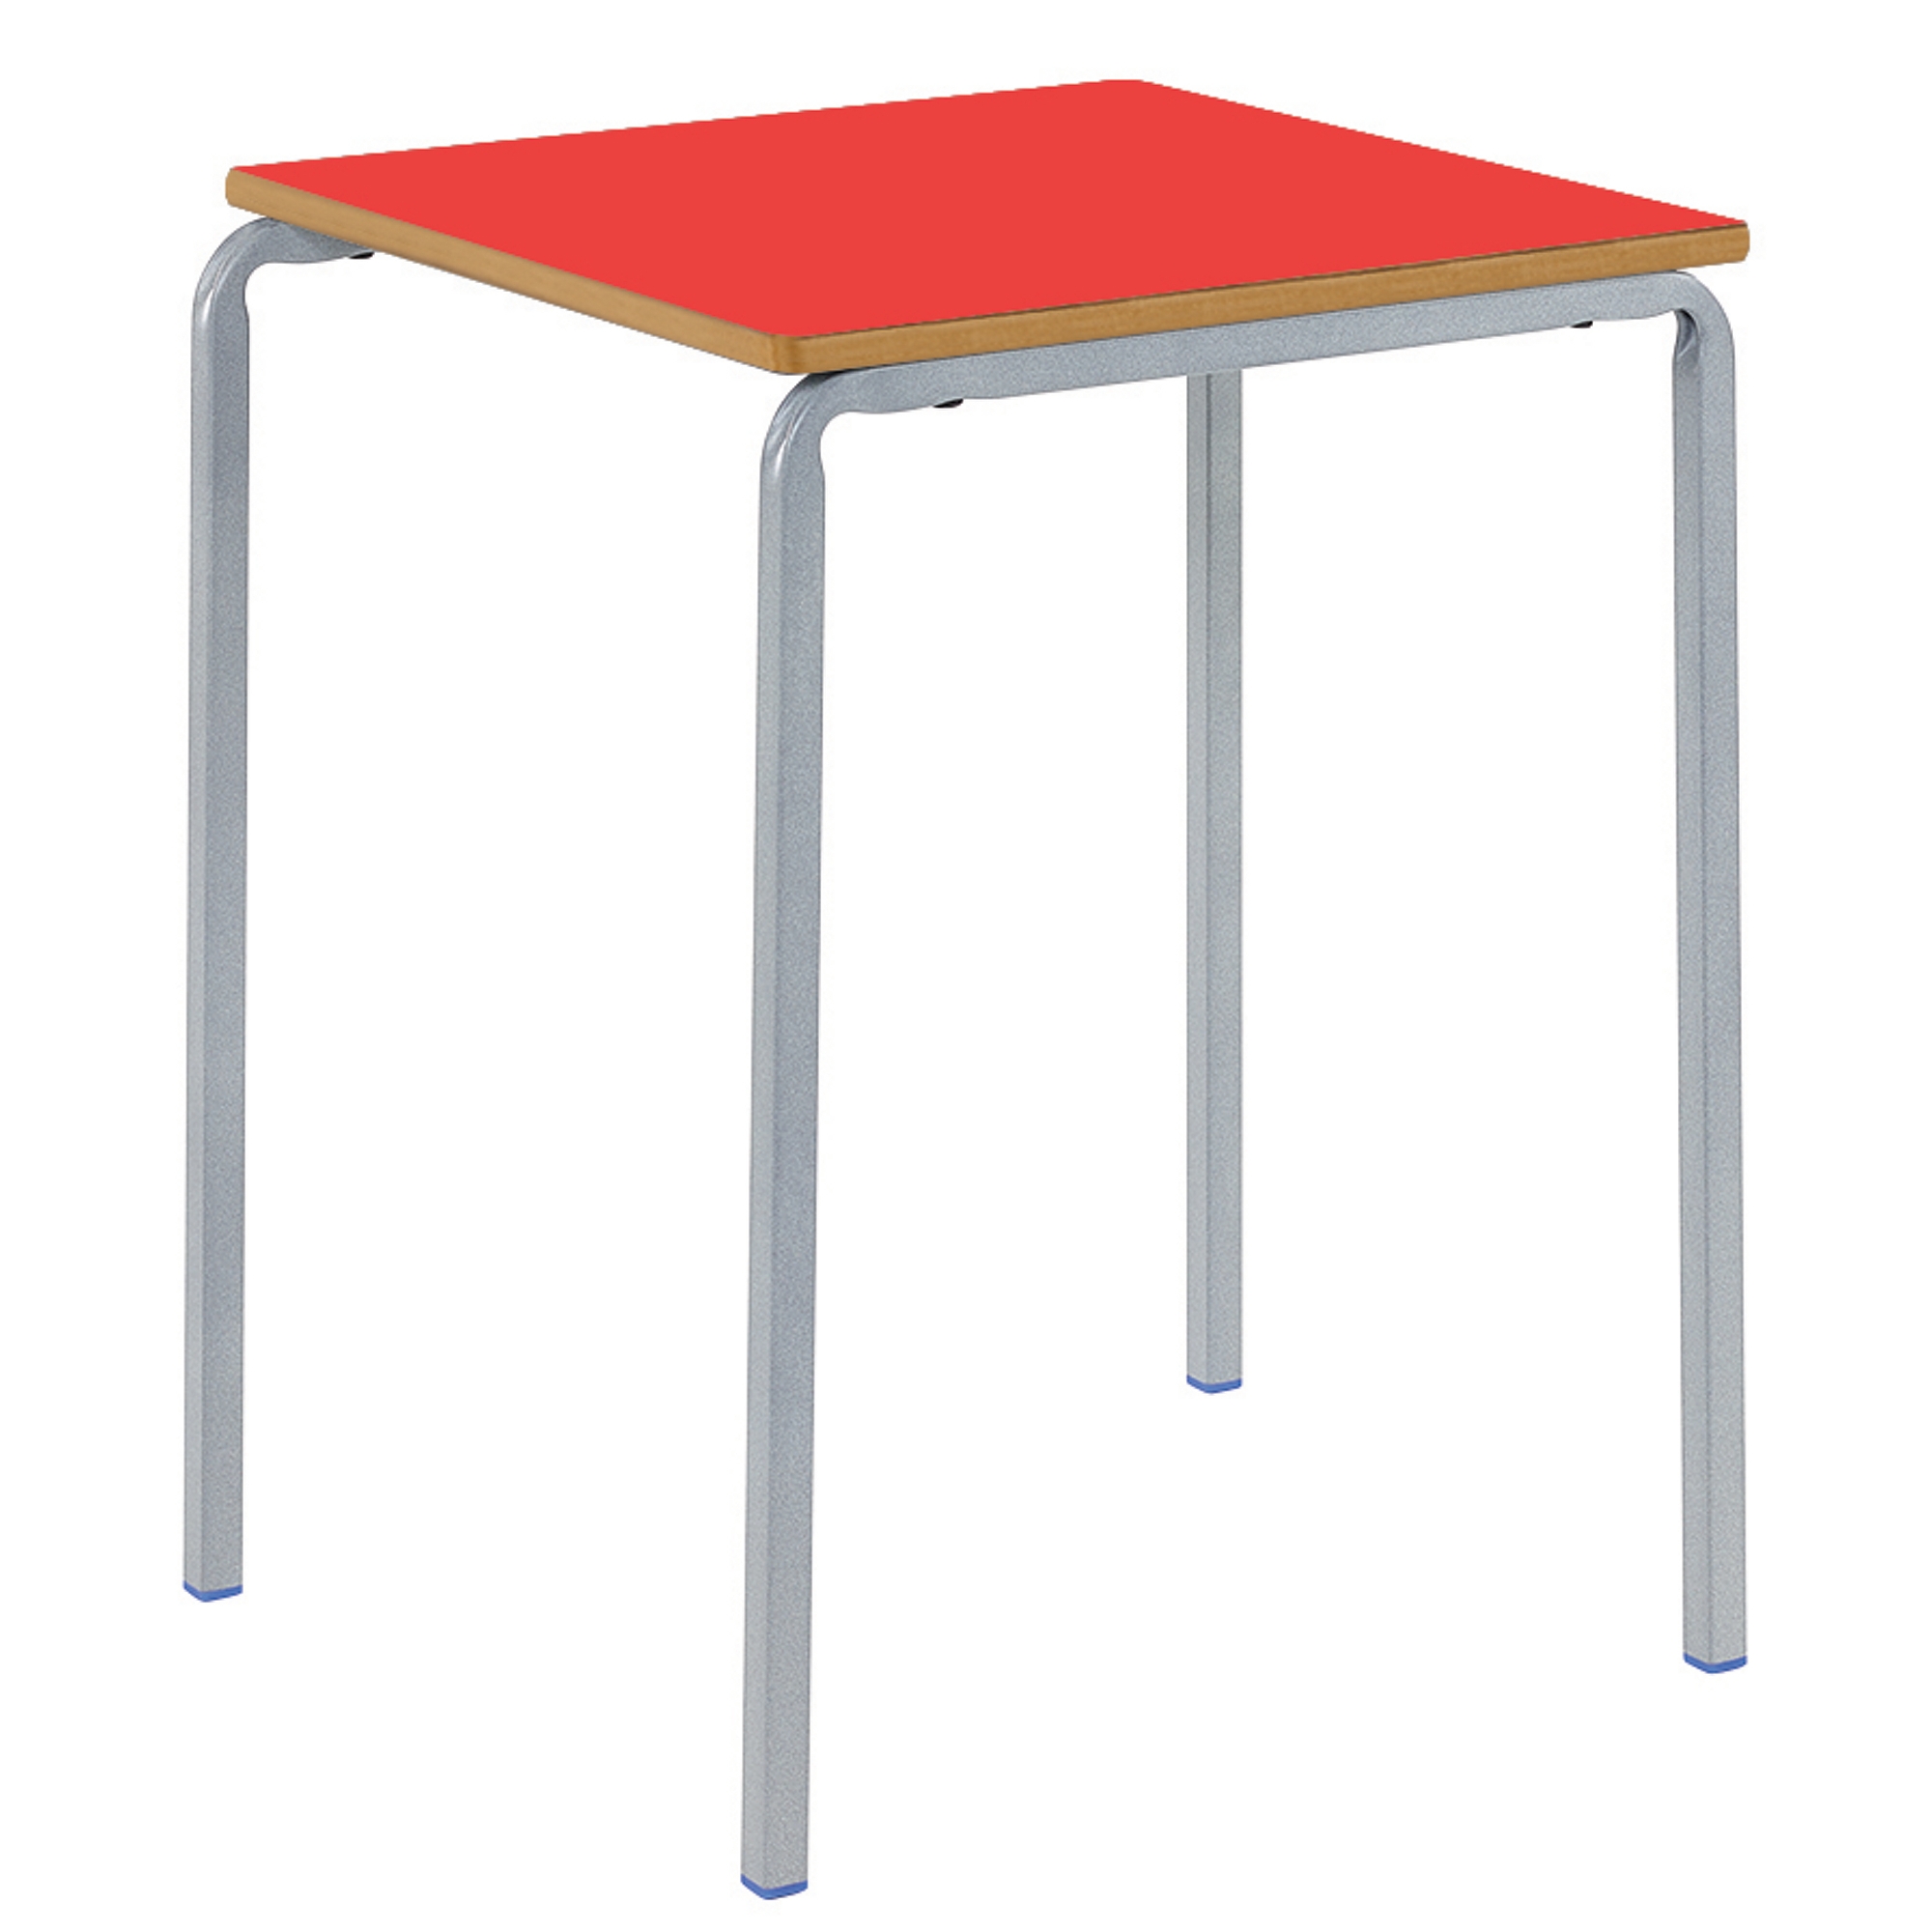 Classmates Square Crushed Bent Classroom Table - 600 x 600 x 640mm - Red